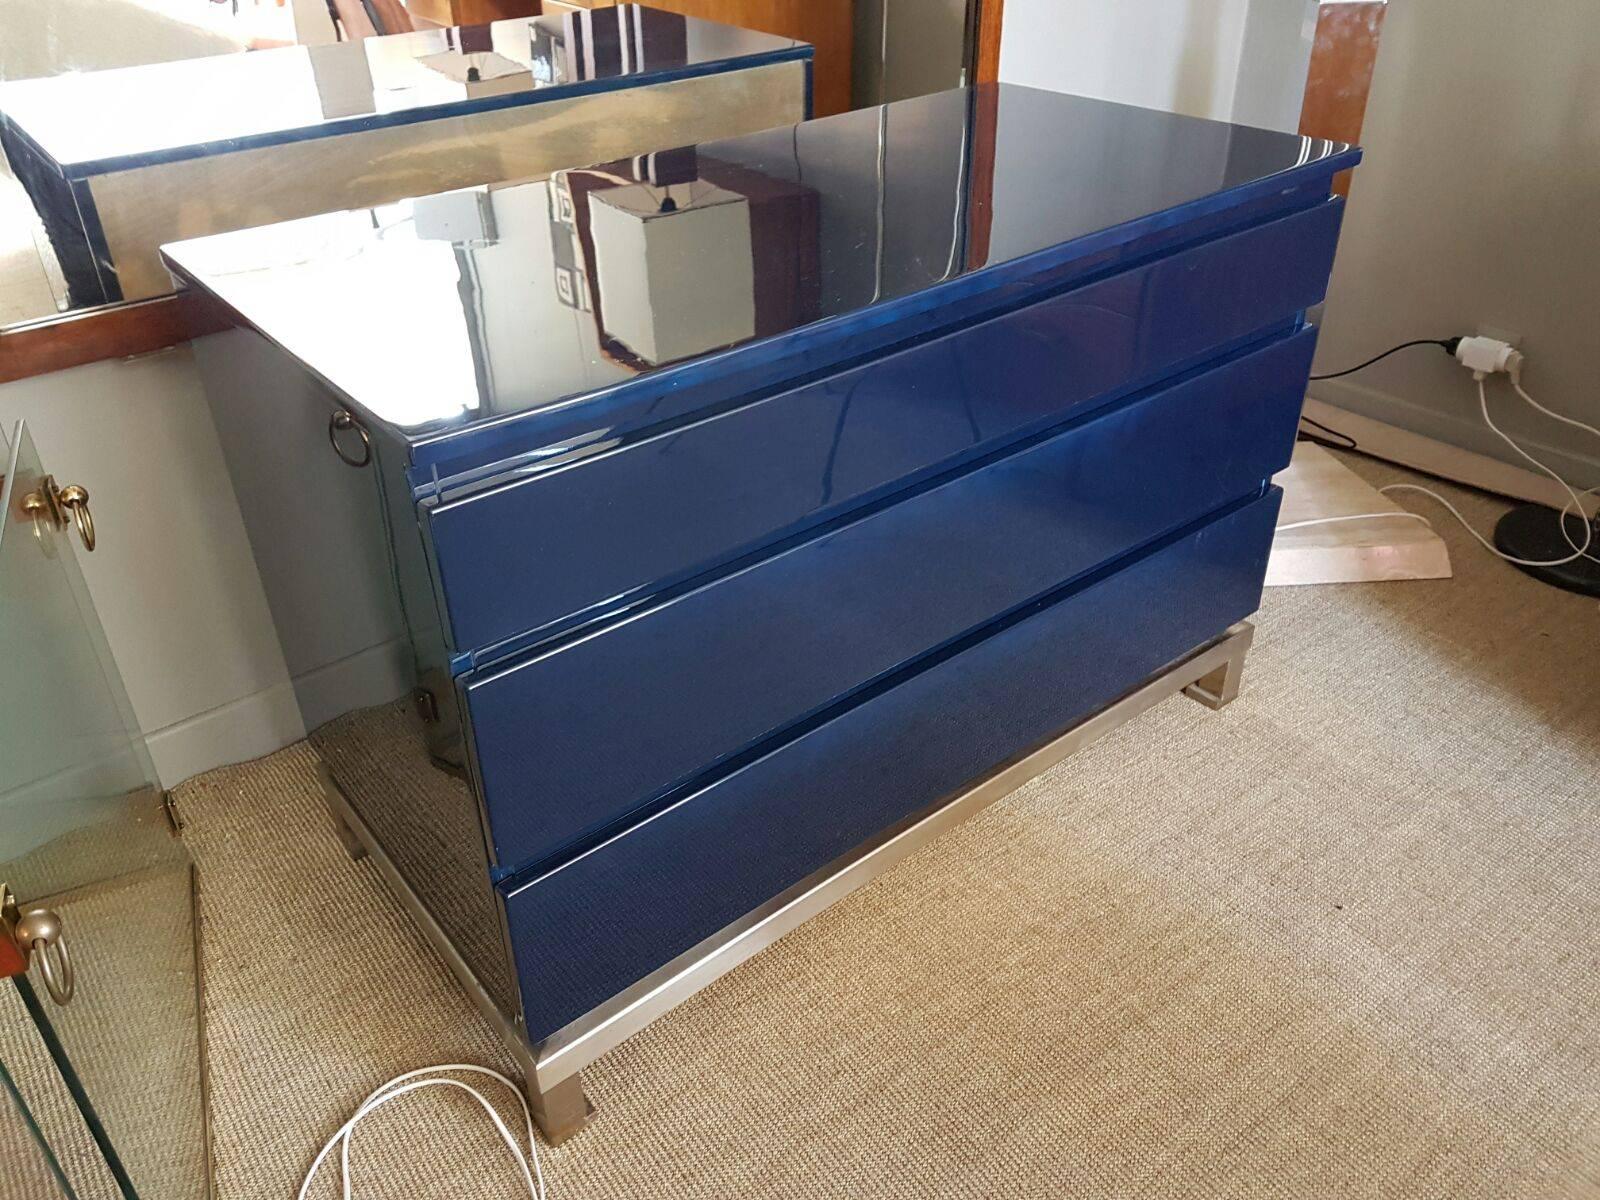 Guy Lefevre for Jansen sideboard, 1970s, blue-lacquered wood, nickeled brass, three drawers.